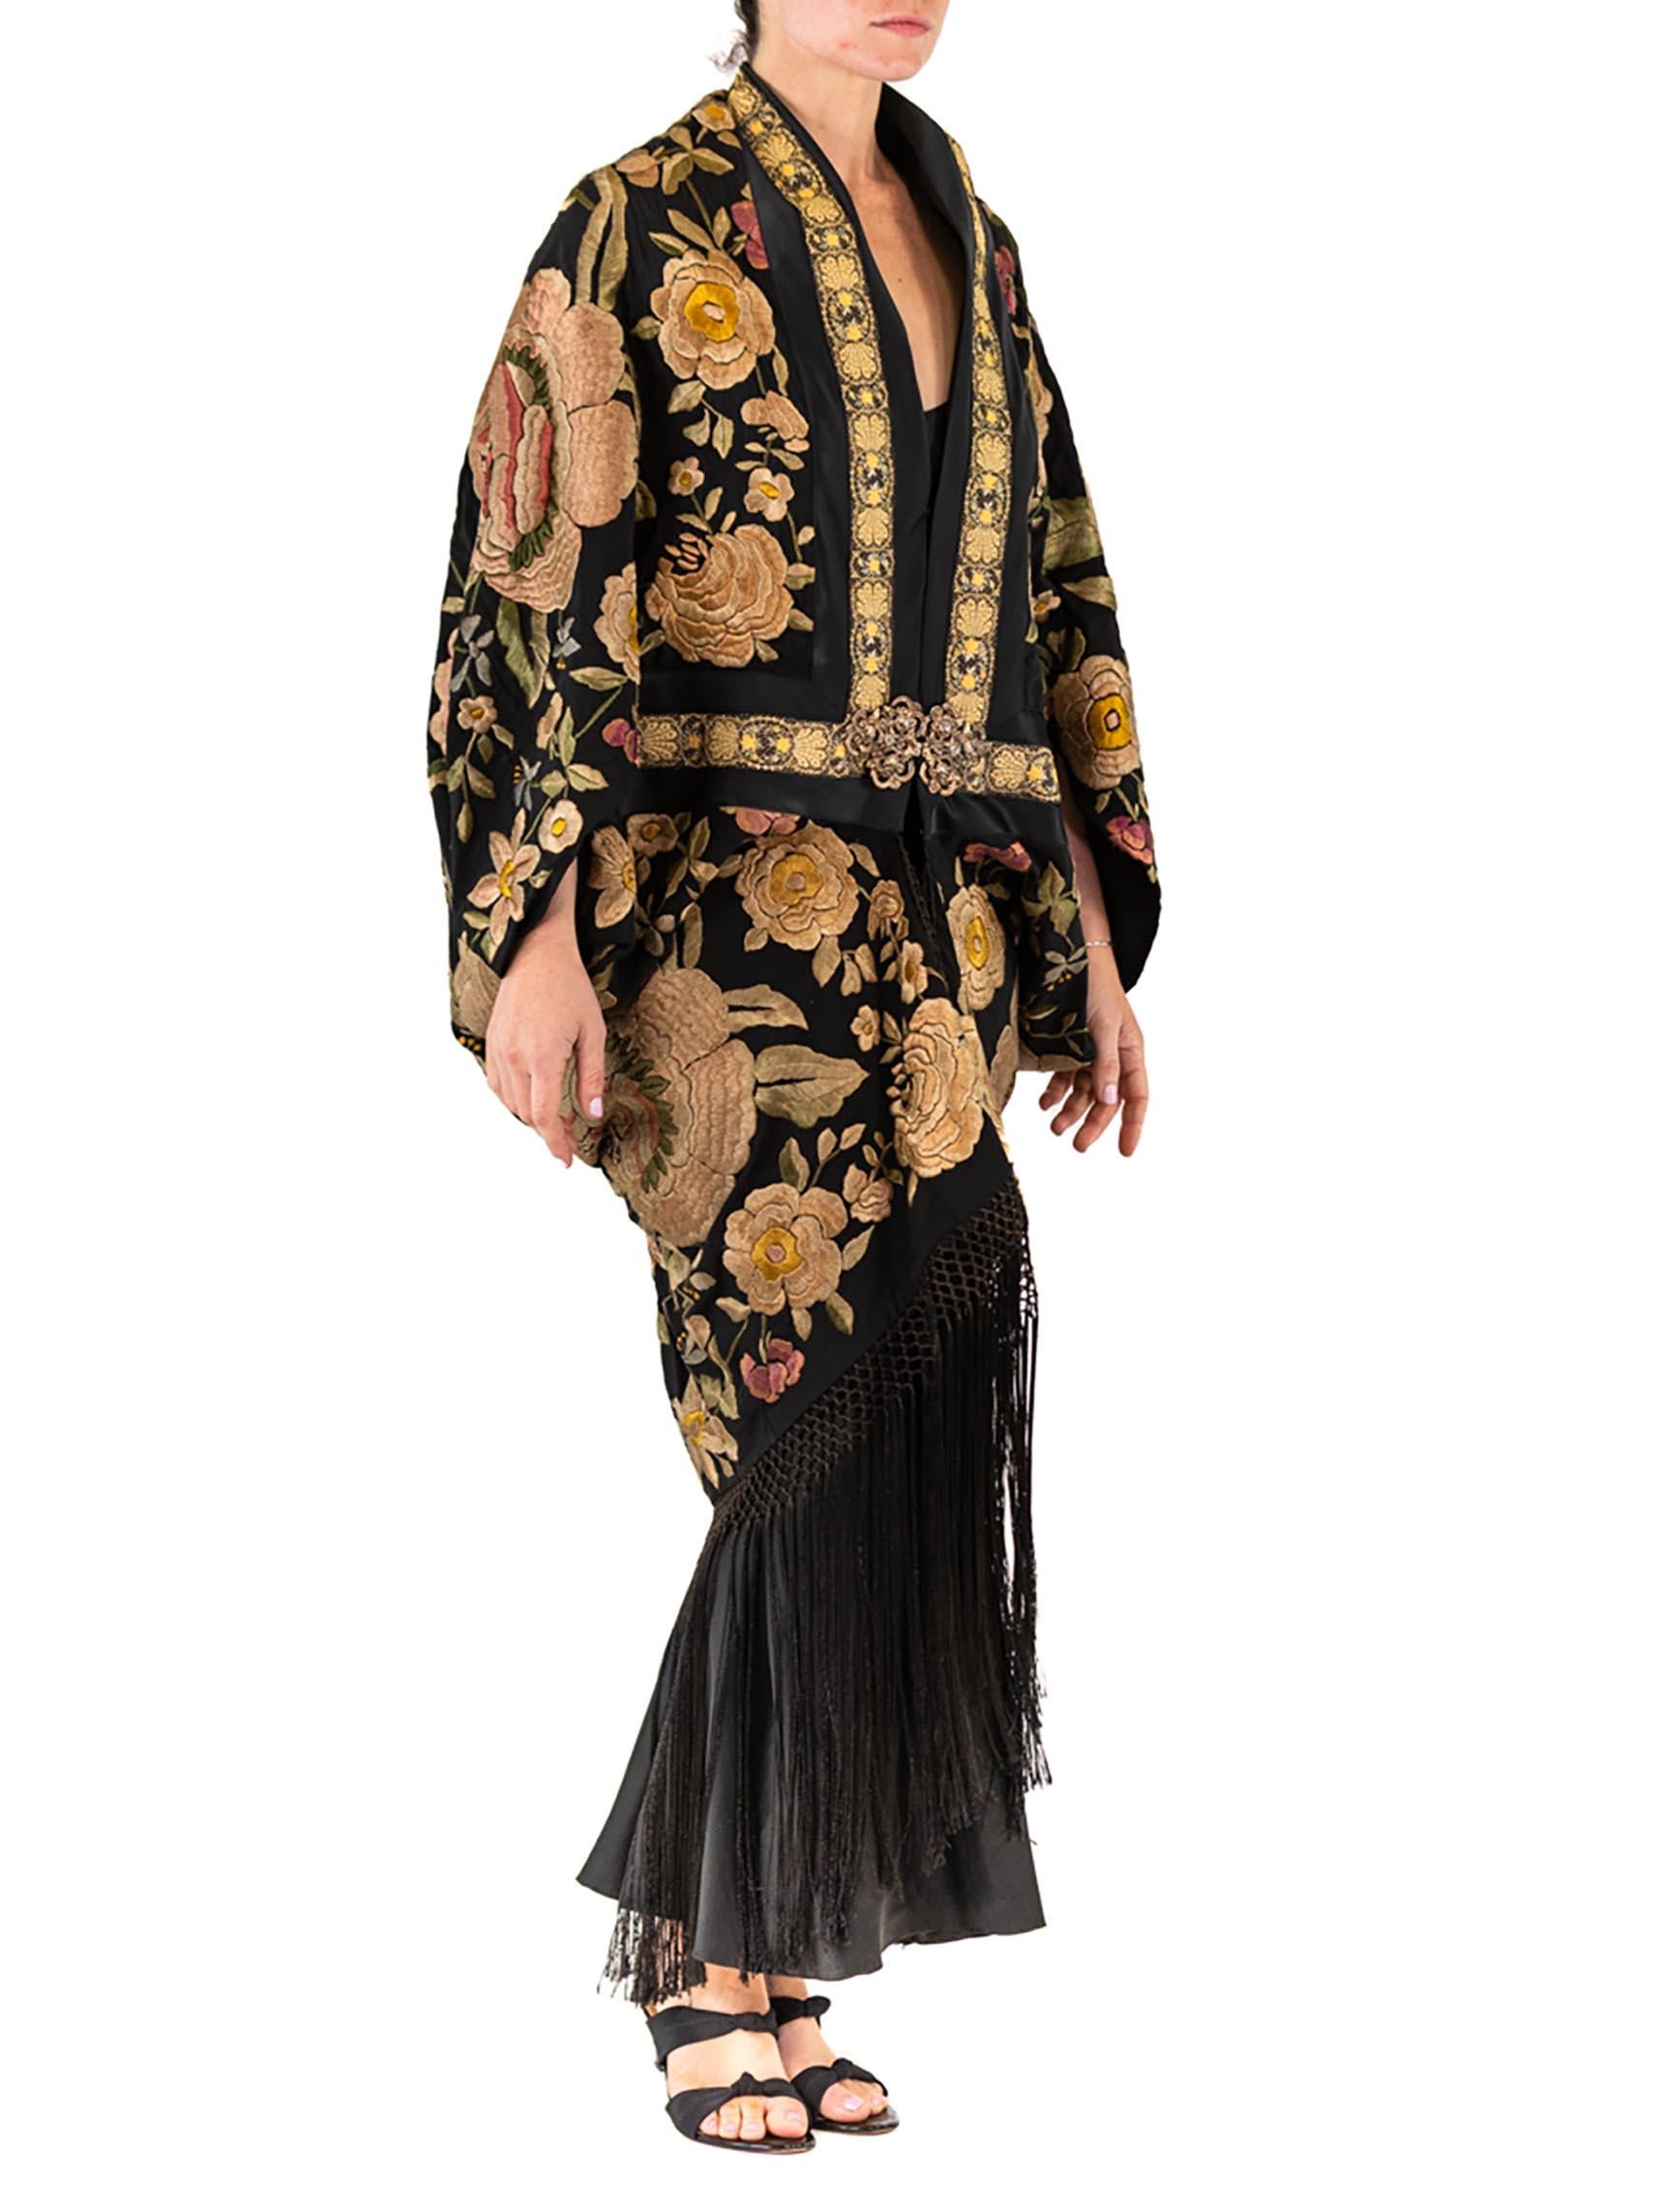 MORPHEW ATELIER Black Hand Embroidered Silk Floral Cocoon With Fringe And Vinta For Sale 3